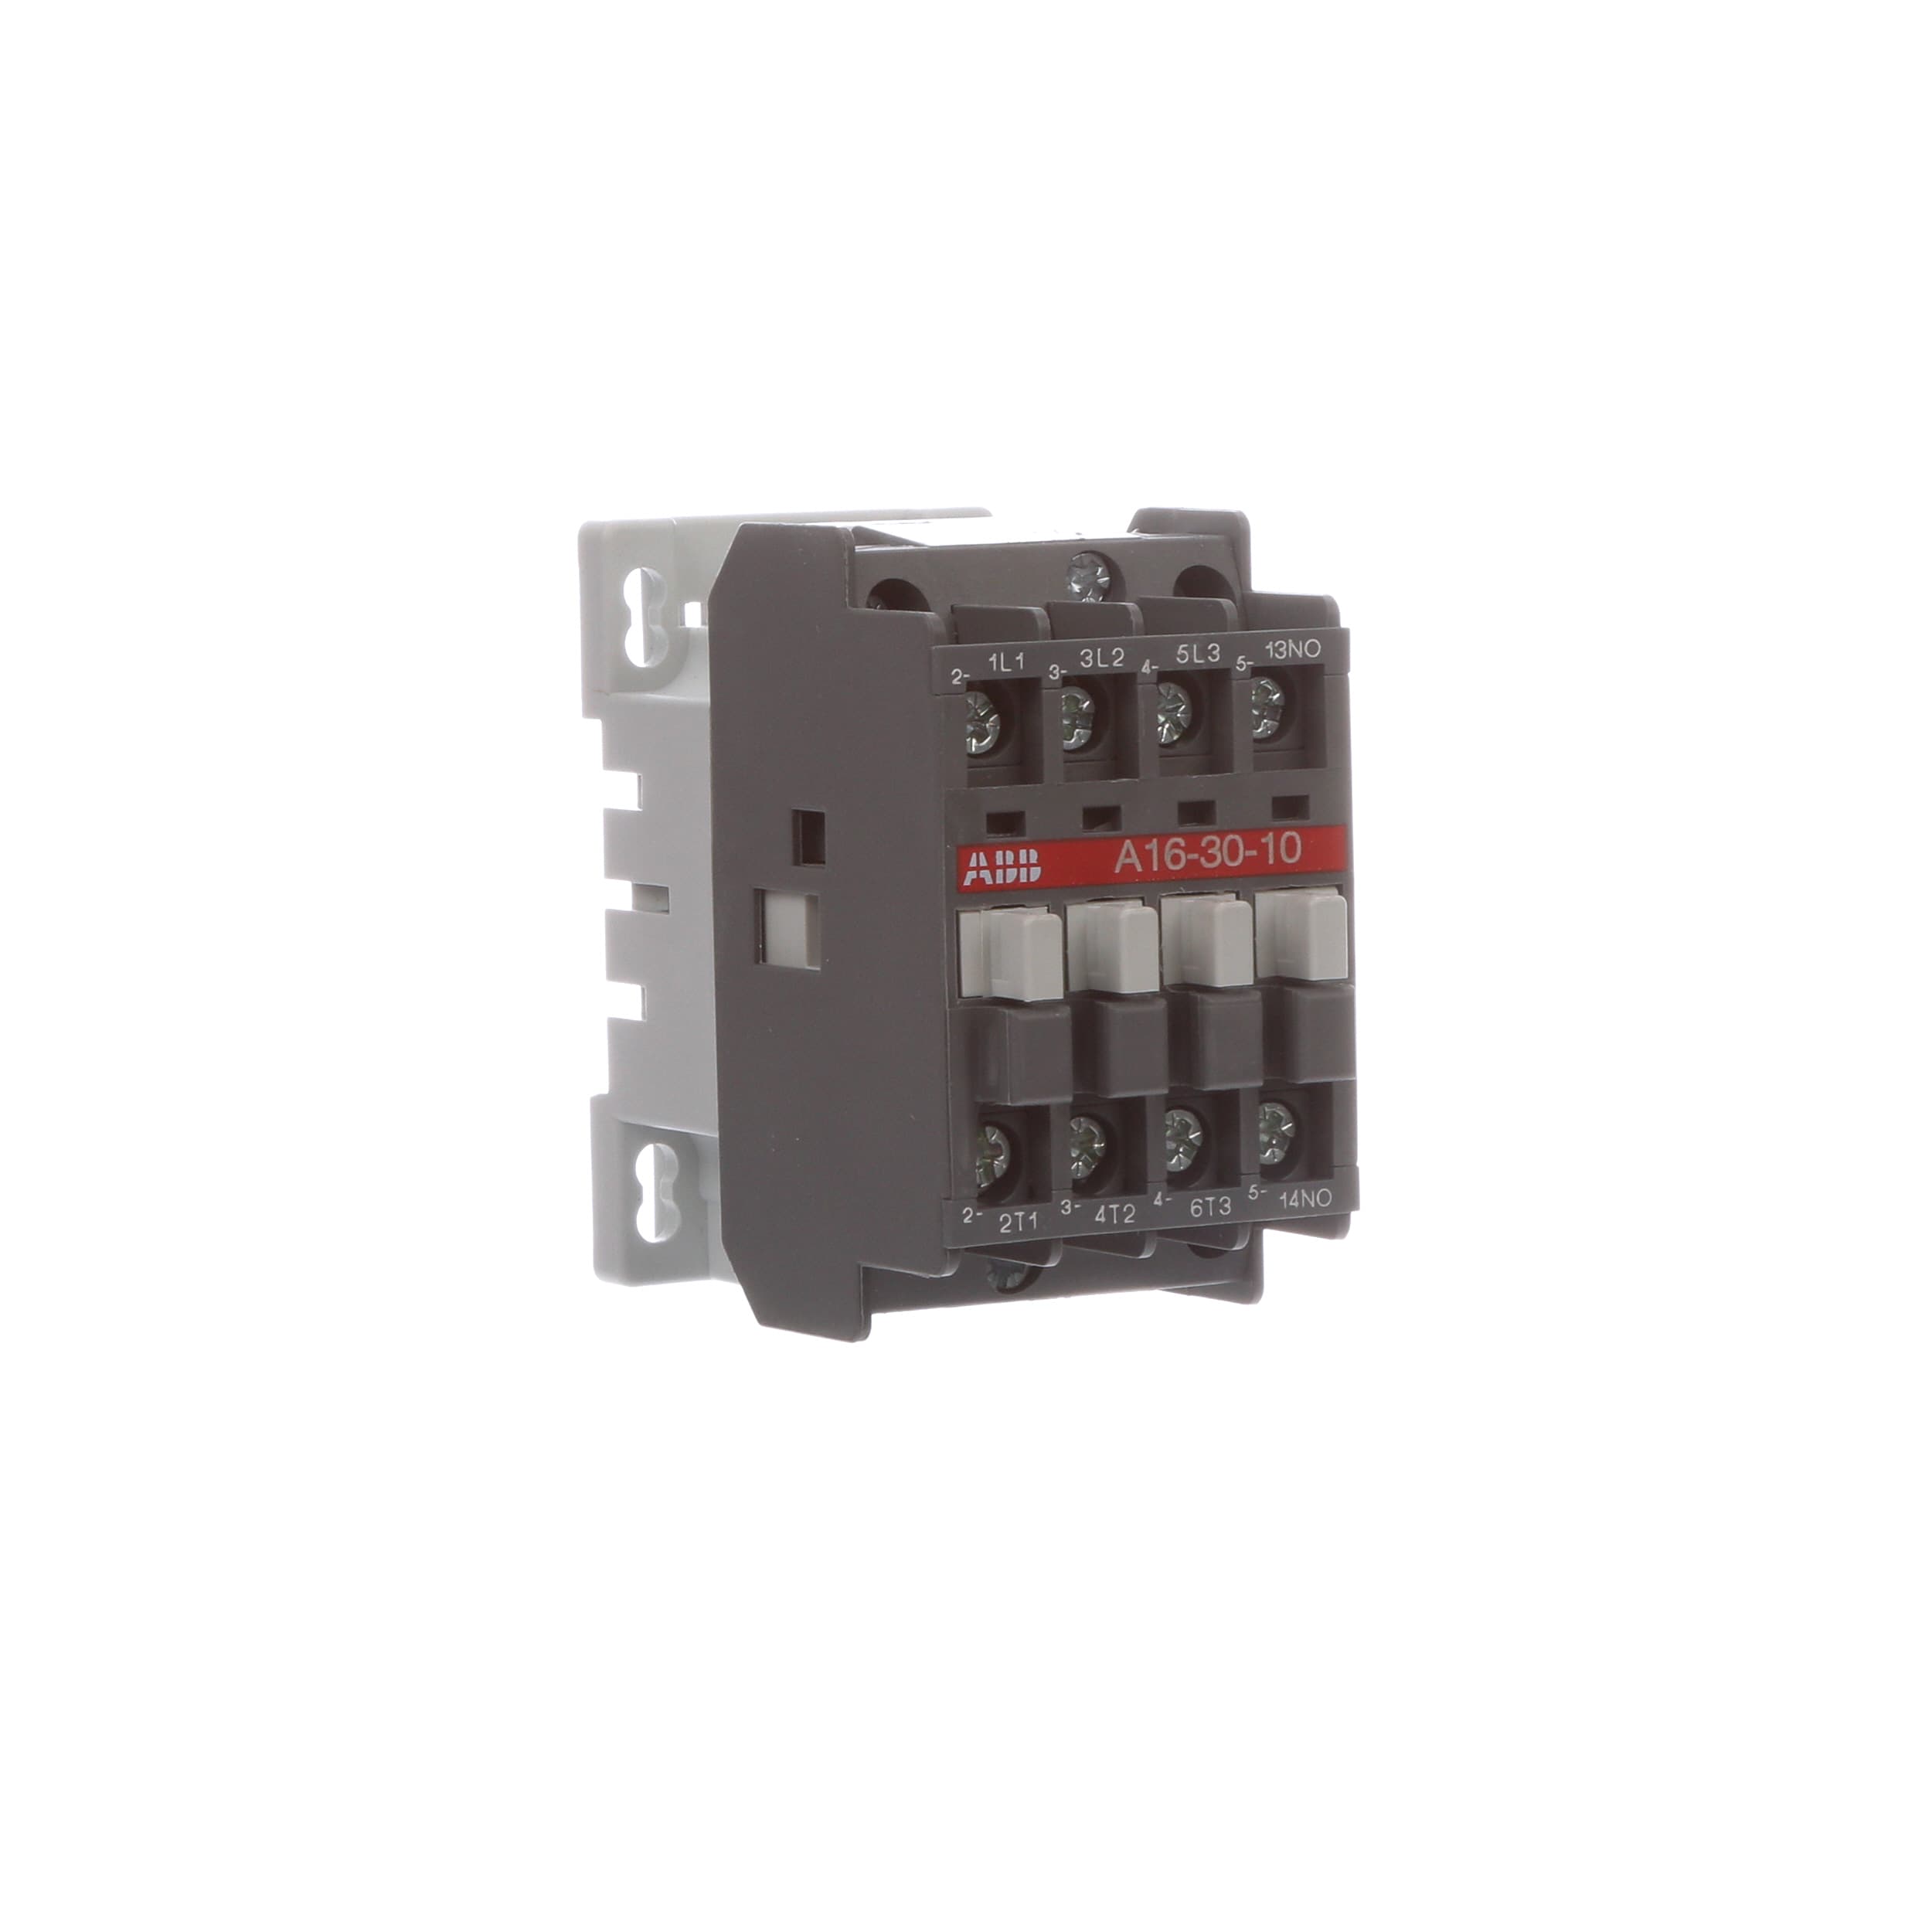 1pc ABB A16-30-10 A163010 AC Contactor One Year for sale online 